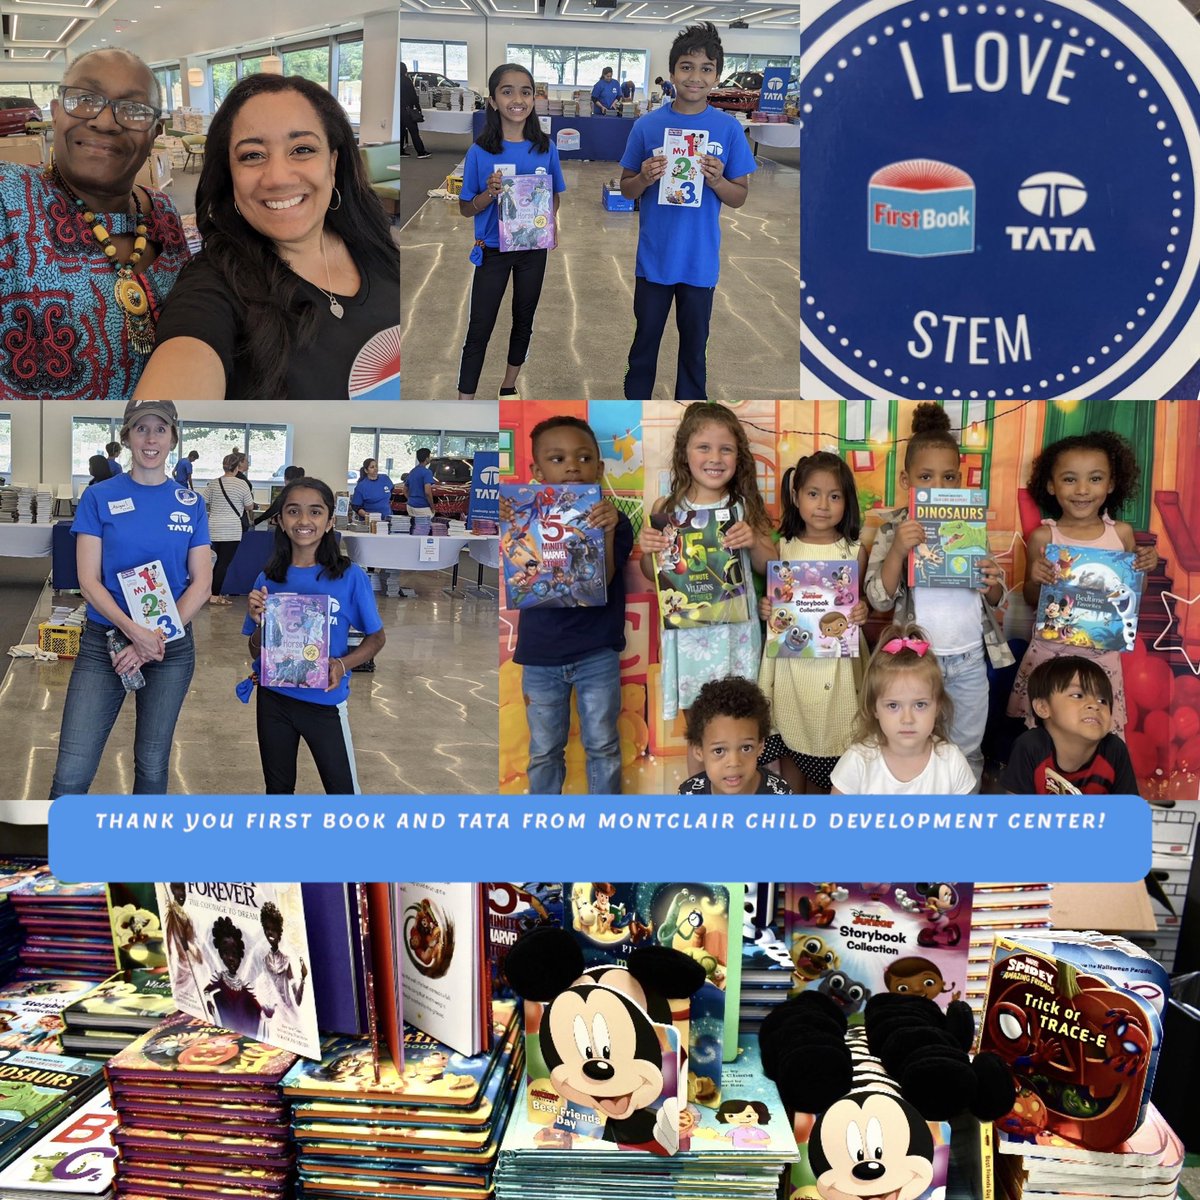 On June 10th, MCDC received 400 free books from First Book and TATA Consultancy Services. We thank you for your large donation to our HS & EHS program. #tcsempowers #headstart #enrollnow @mcdcnj @sons_tata @firstbookmarket @firstbook @tcs_na @ItzCreedVR